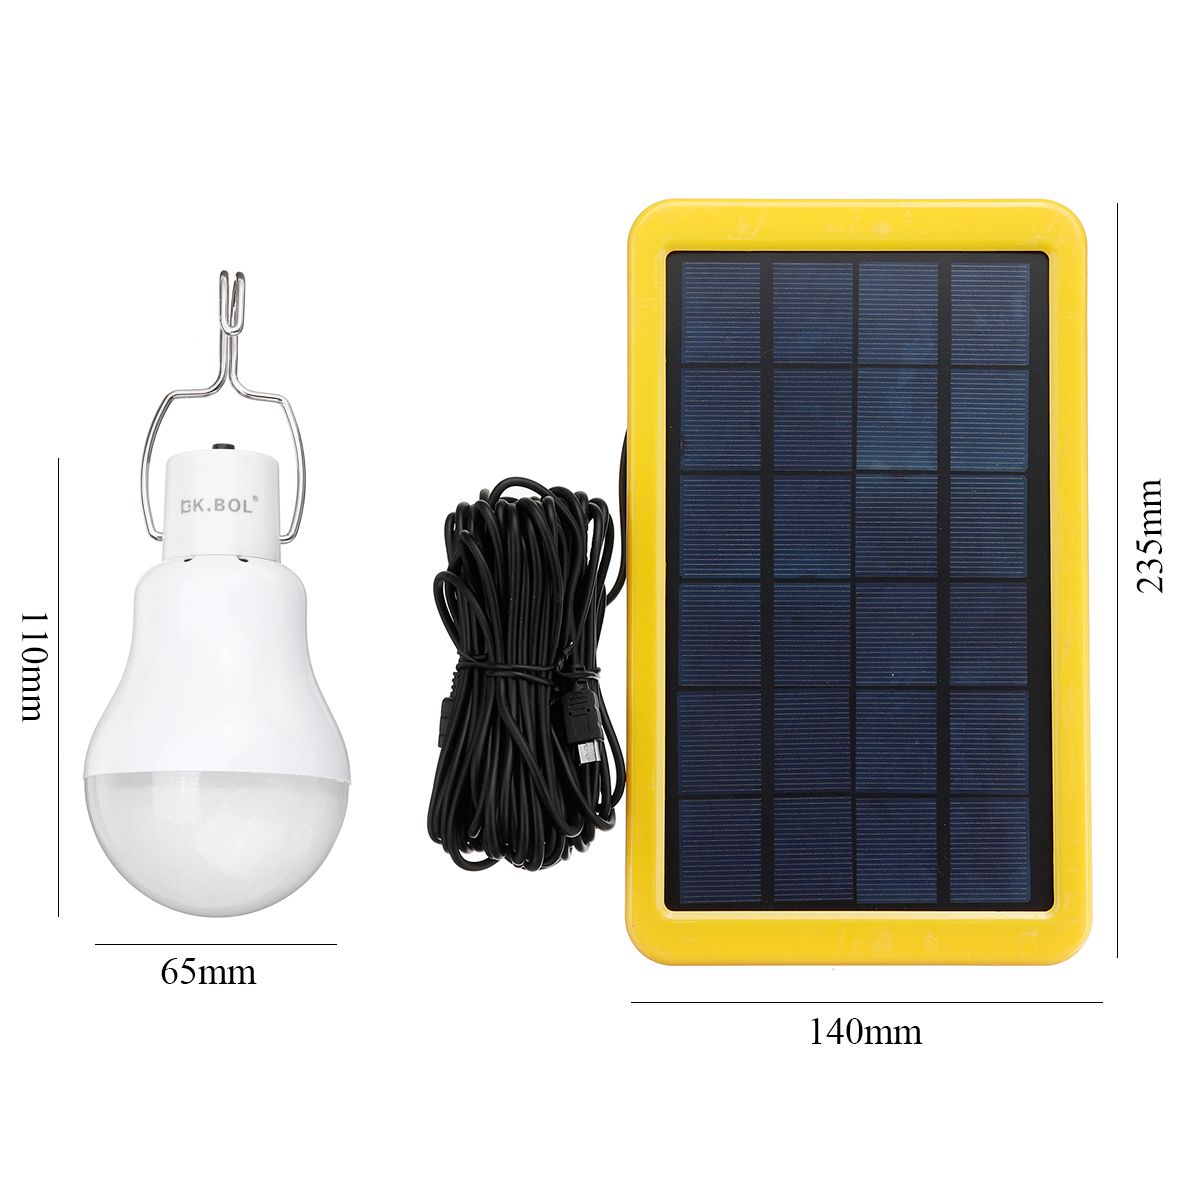 3x-LED-Light-Bulb-Lamp--Solar-Powered-Shed-Portable-Hang-Hooking-Chicken-Coop-1753815